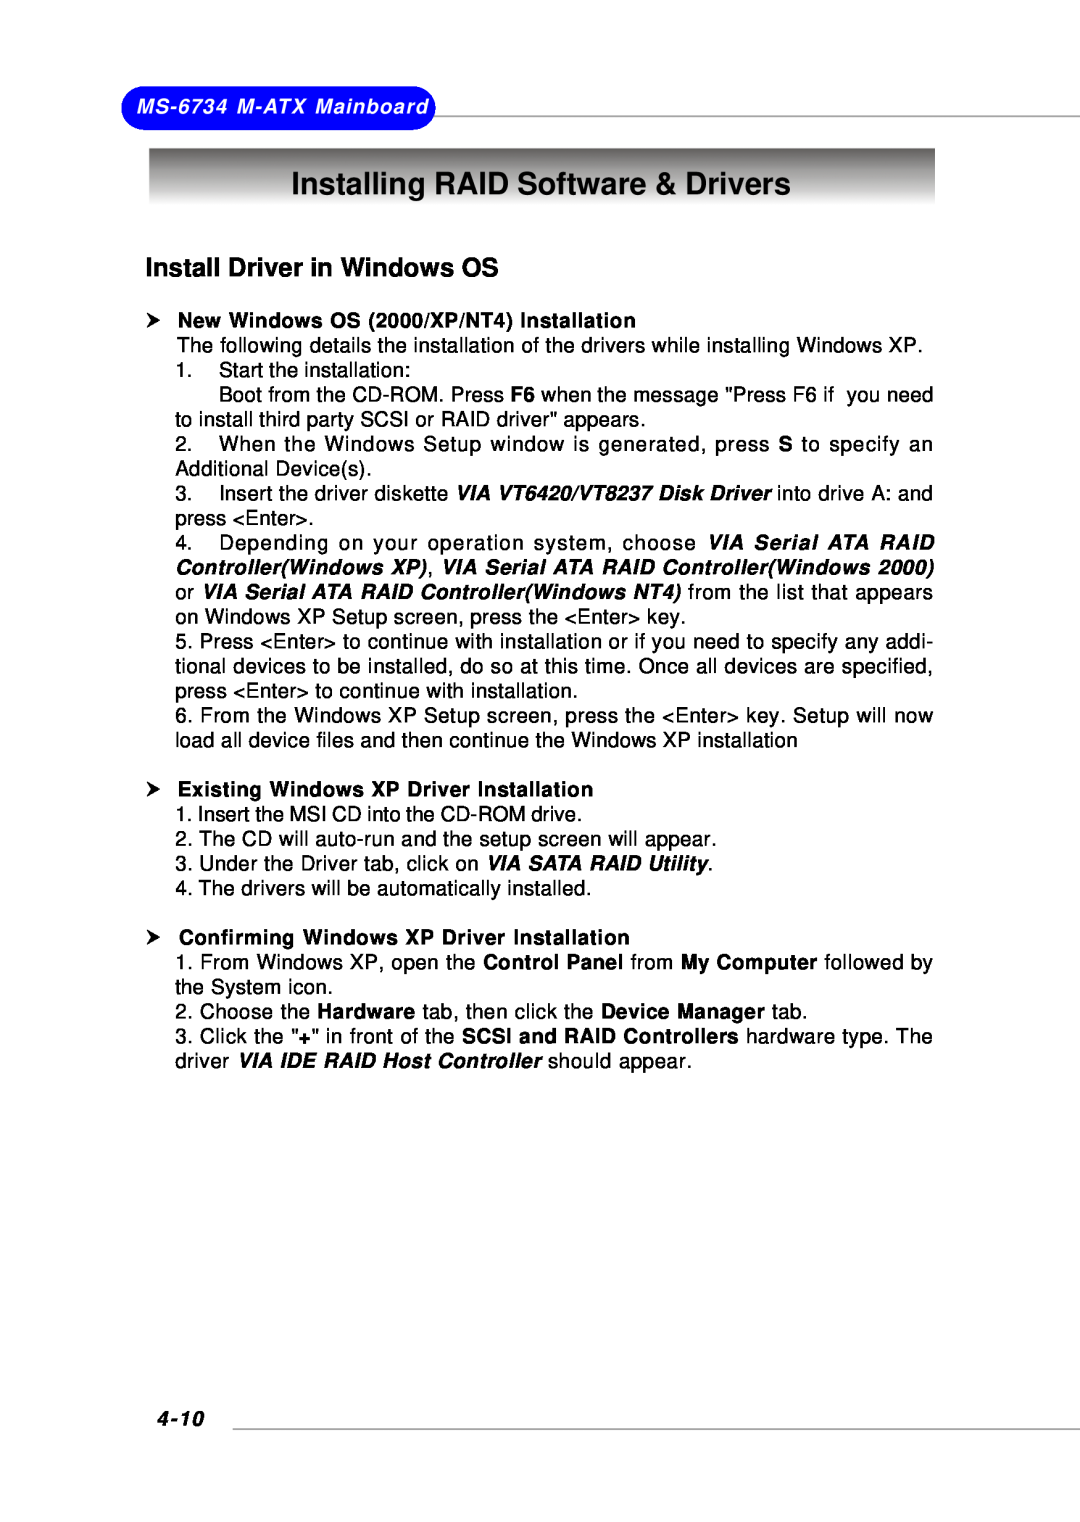 Intel KM4AM Installing RAID Software & Drivers, Install Driver in Windows OS, h New Windows OS 2000/XP/NT4 Installation 